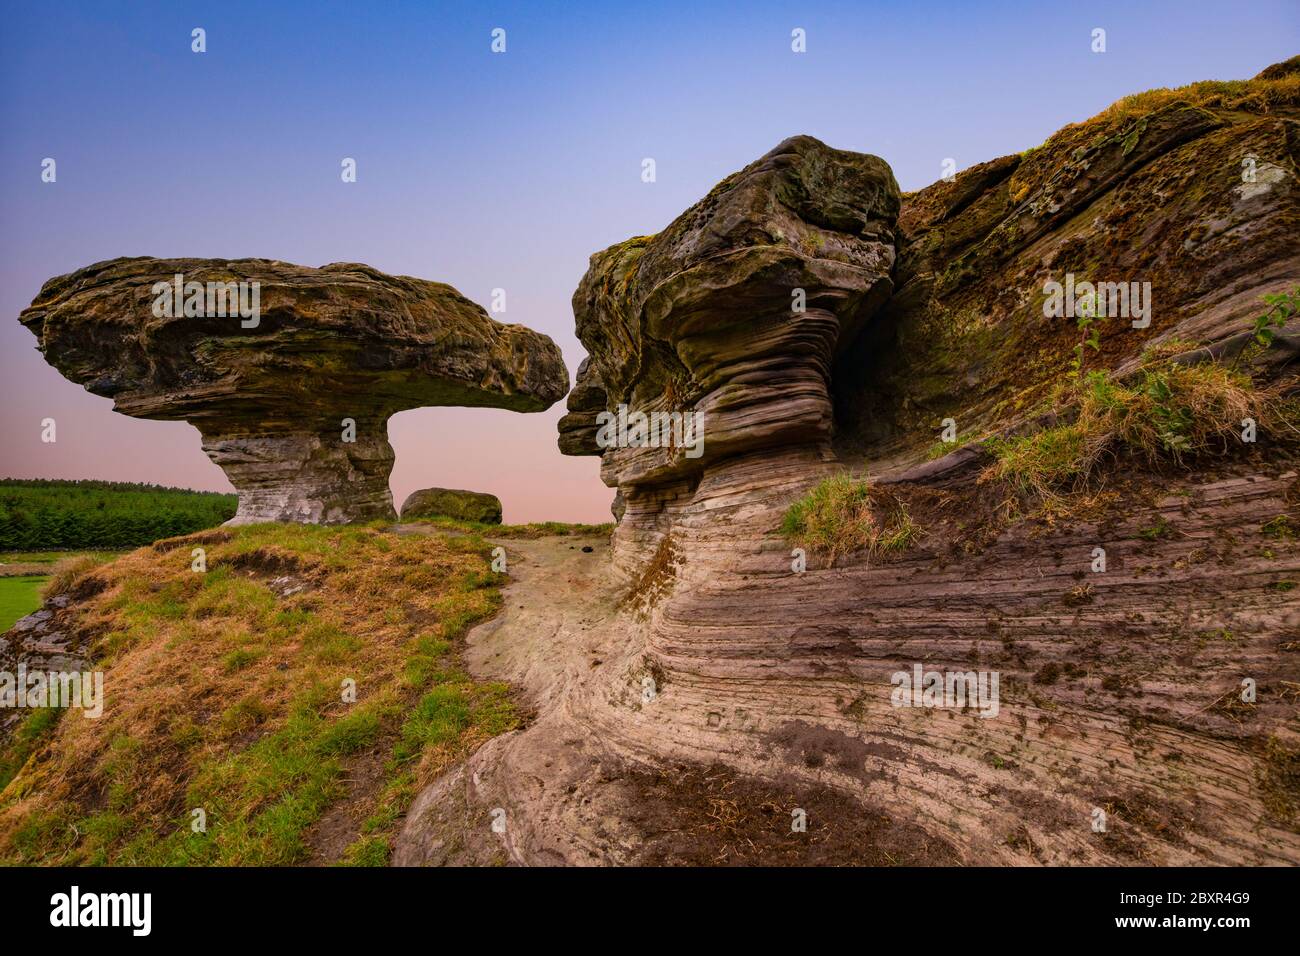 Mushroom rock formation known as the Bunnet Stane. Located on the Lomond hills, Fife, Scotland, UK. Stock Photo